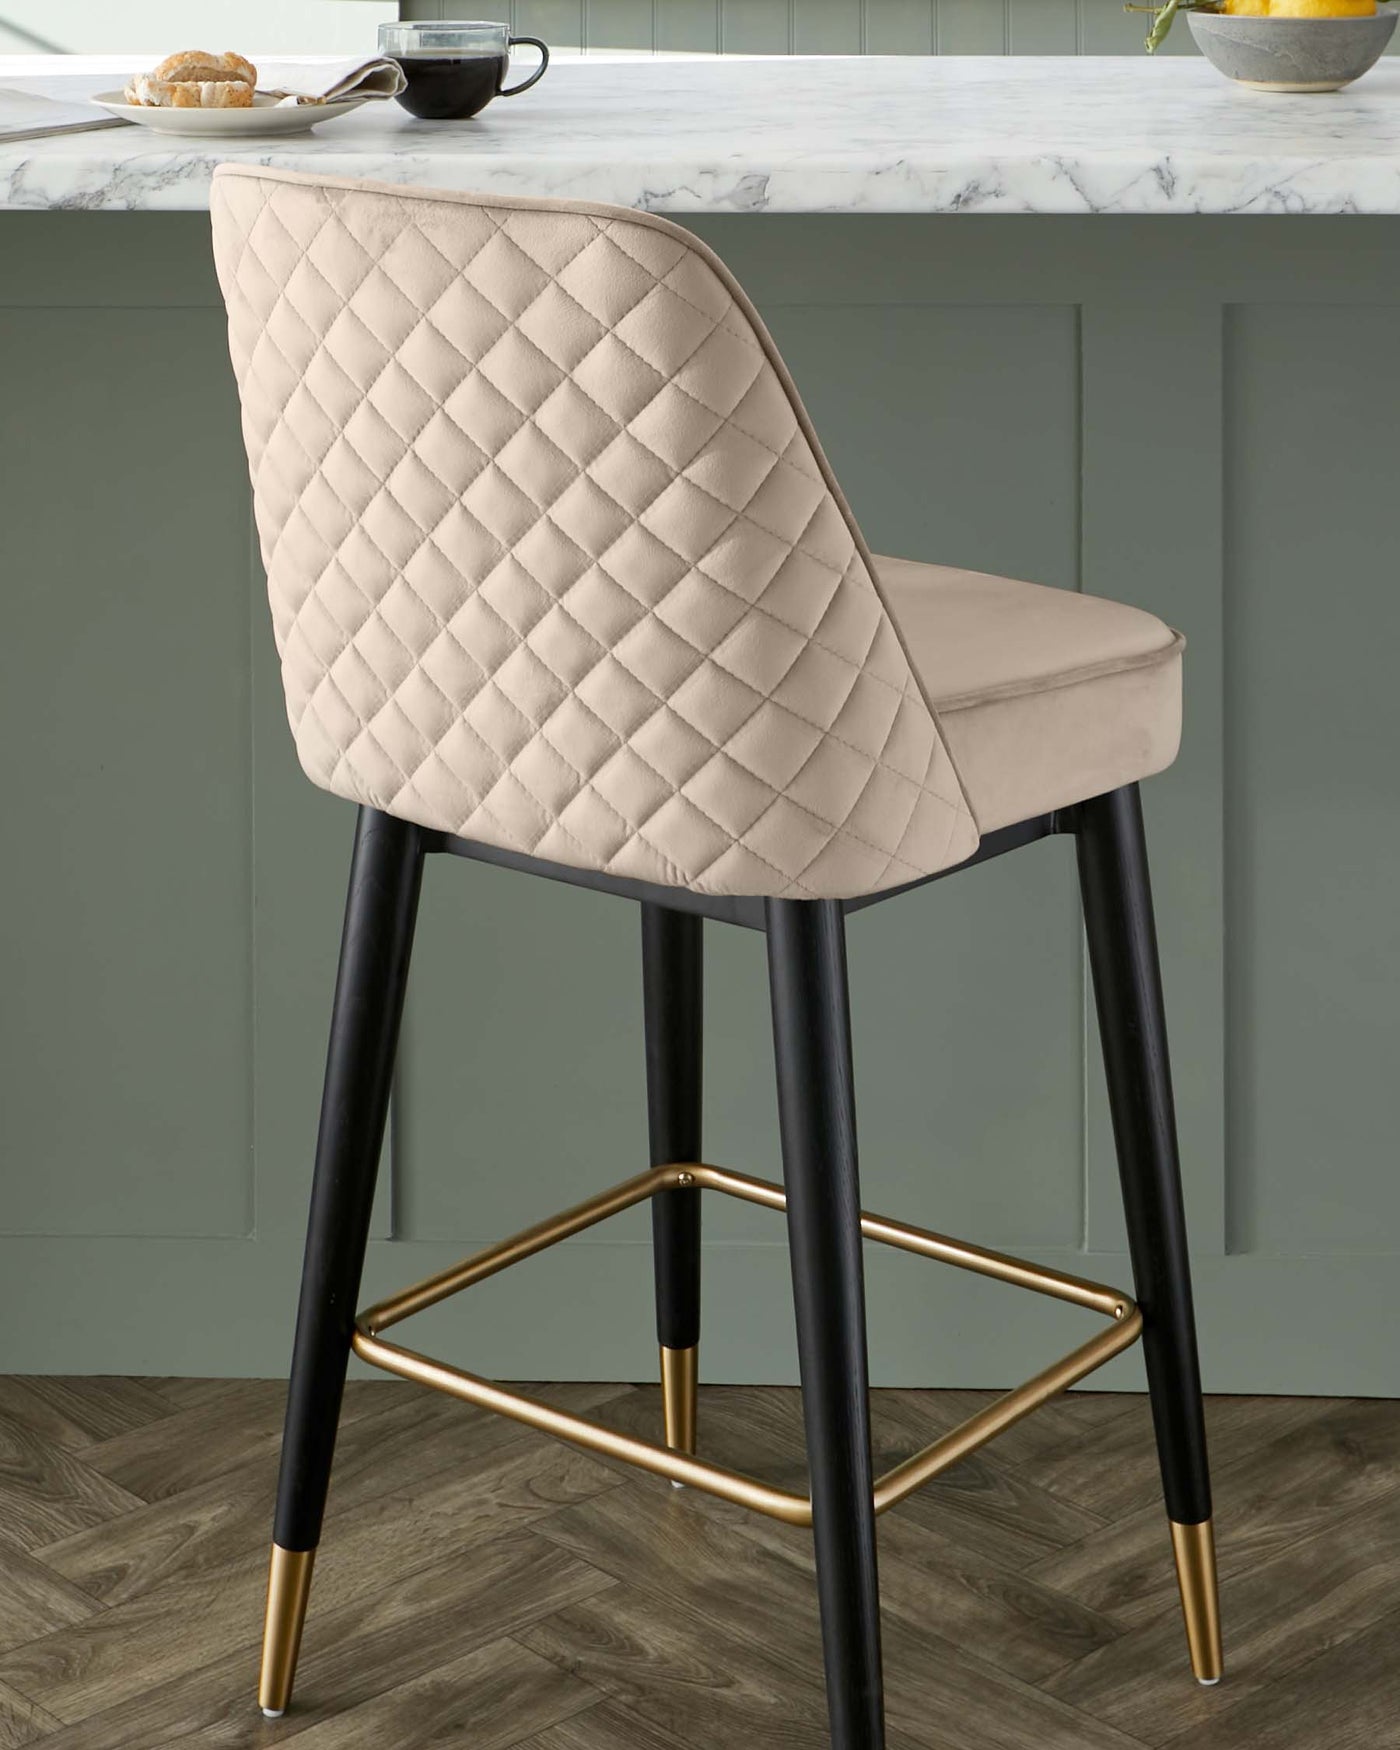 Elegant contemporary bar stool featuring a plush, beige, diamond-tufted upholstered backrest and seat, with sleek black legs accented with gold tips and a matching gold footrest.